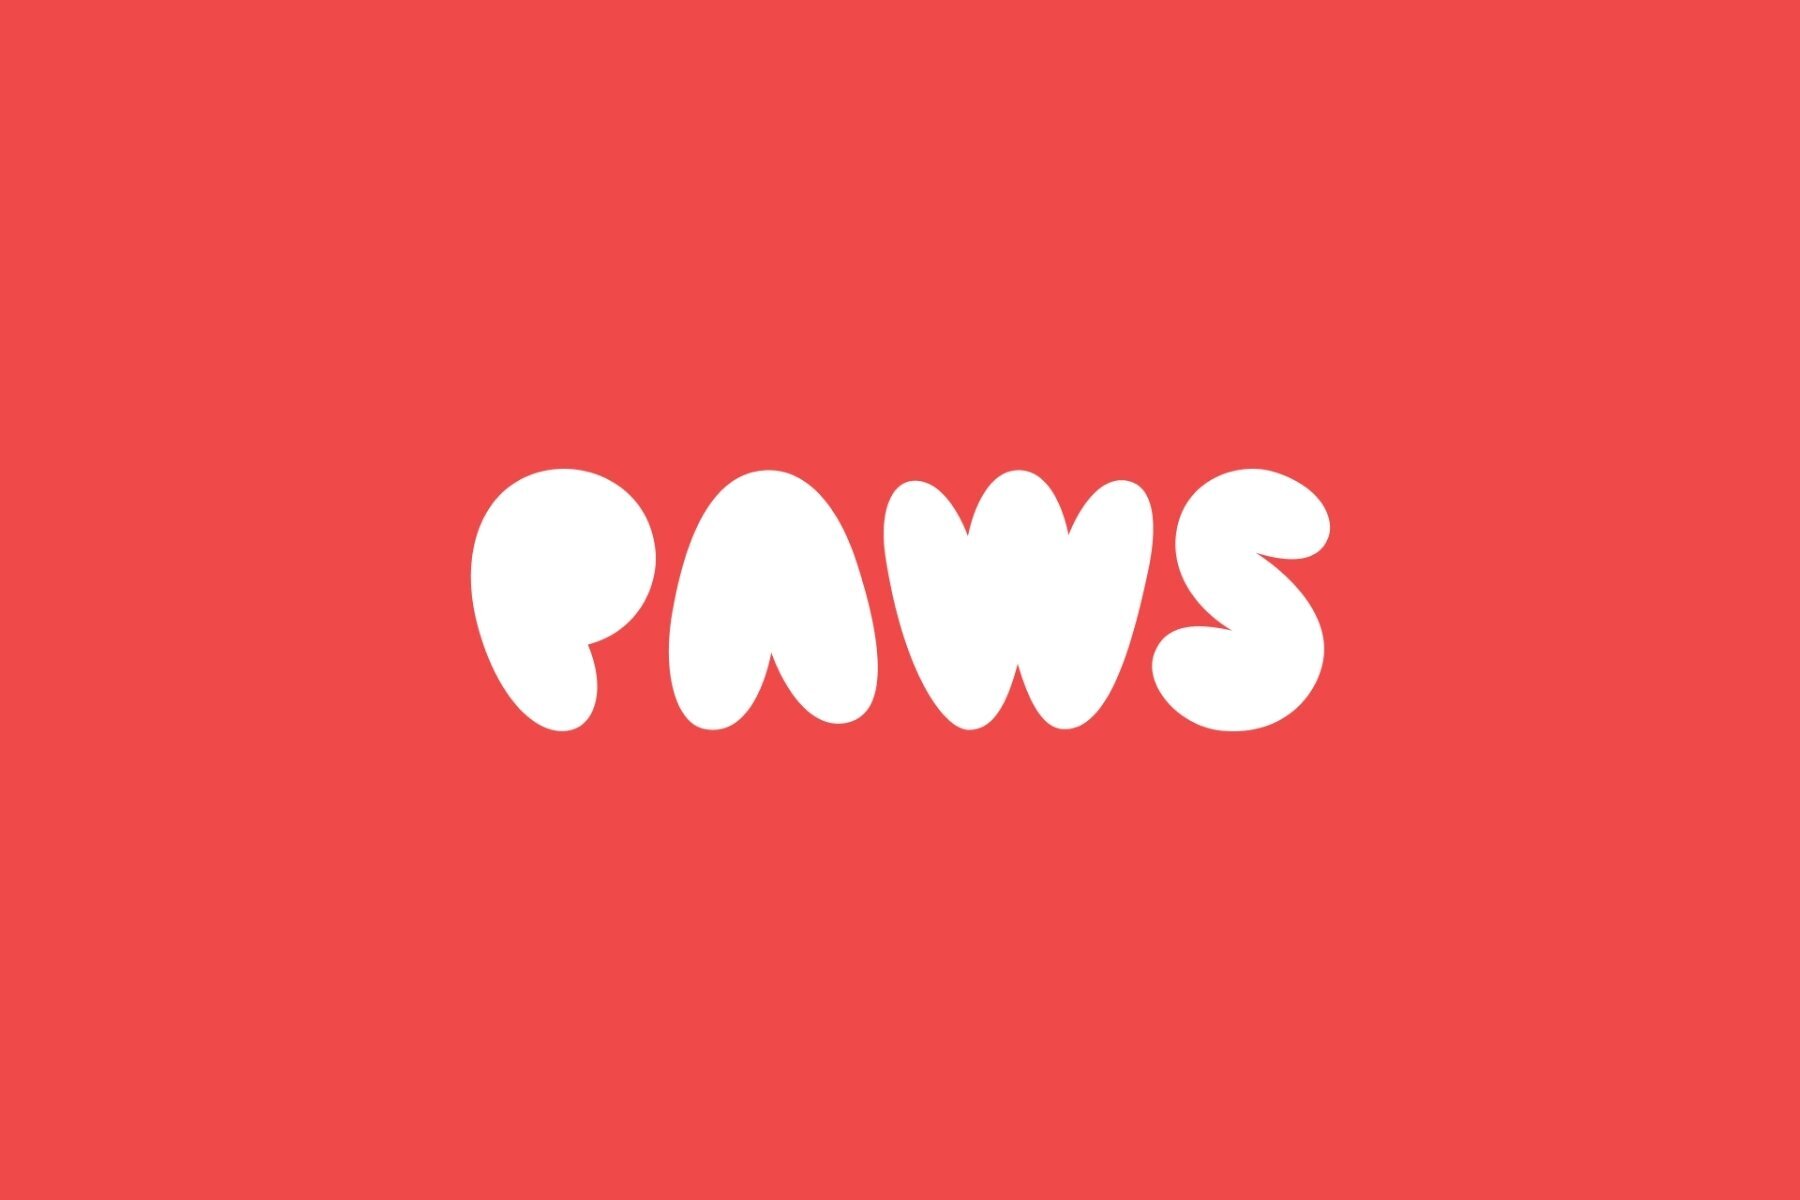 Retained Executive Search for Paws’ new CCO